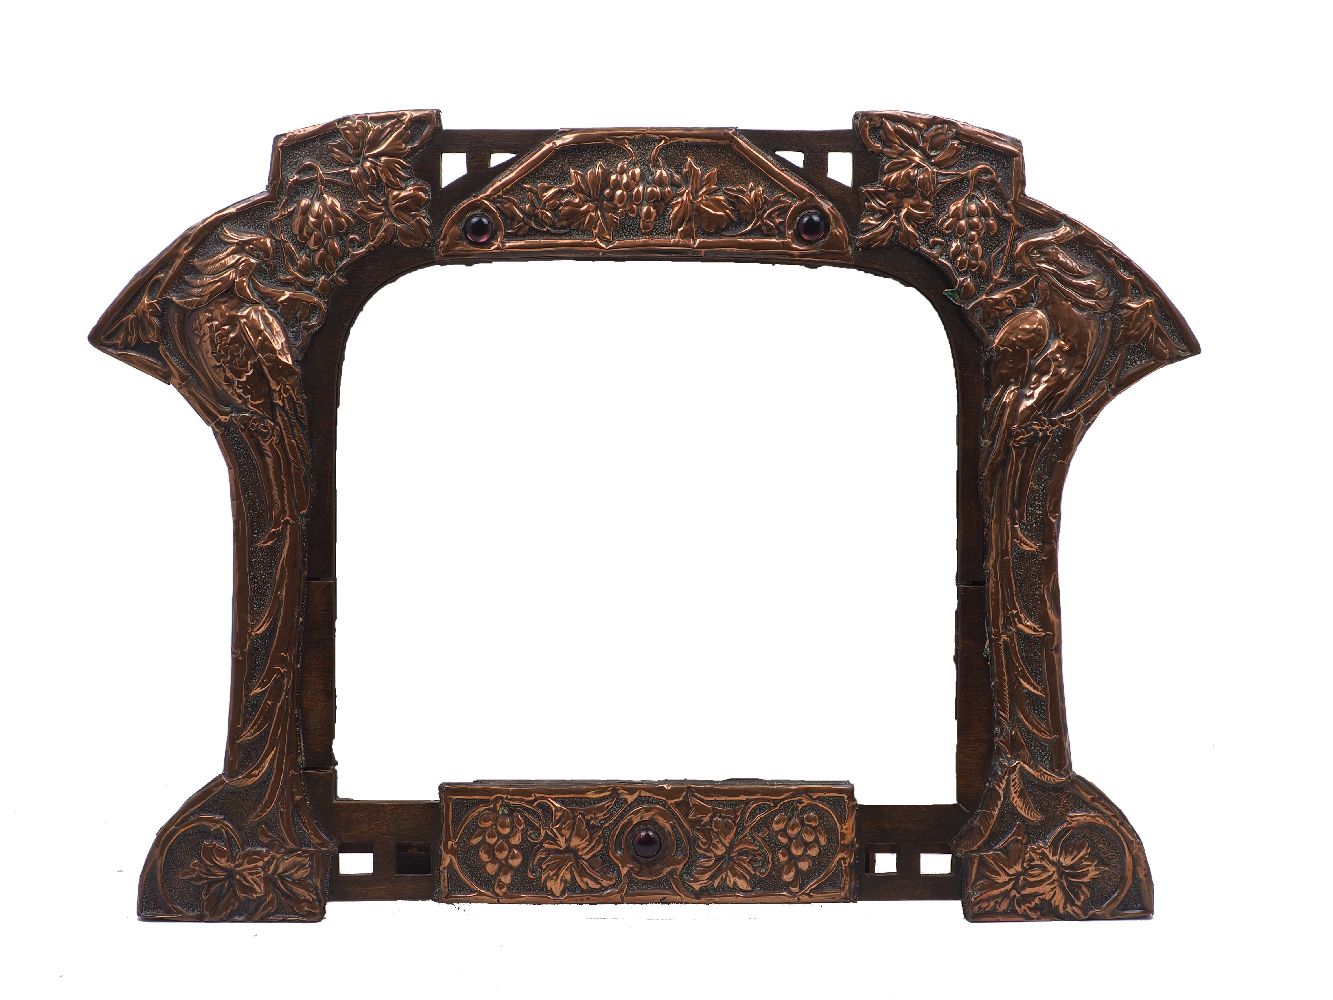 An Arts & Crafts repousse copper on wood mirror, early 20th century, the arched plate flanked by